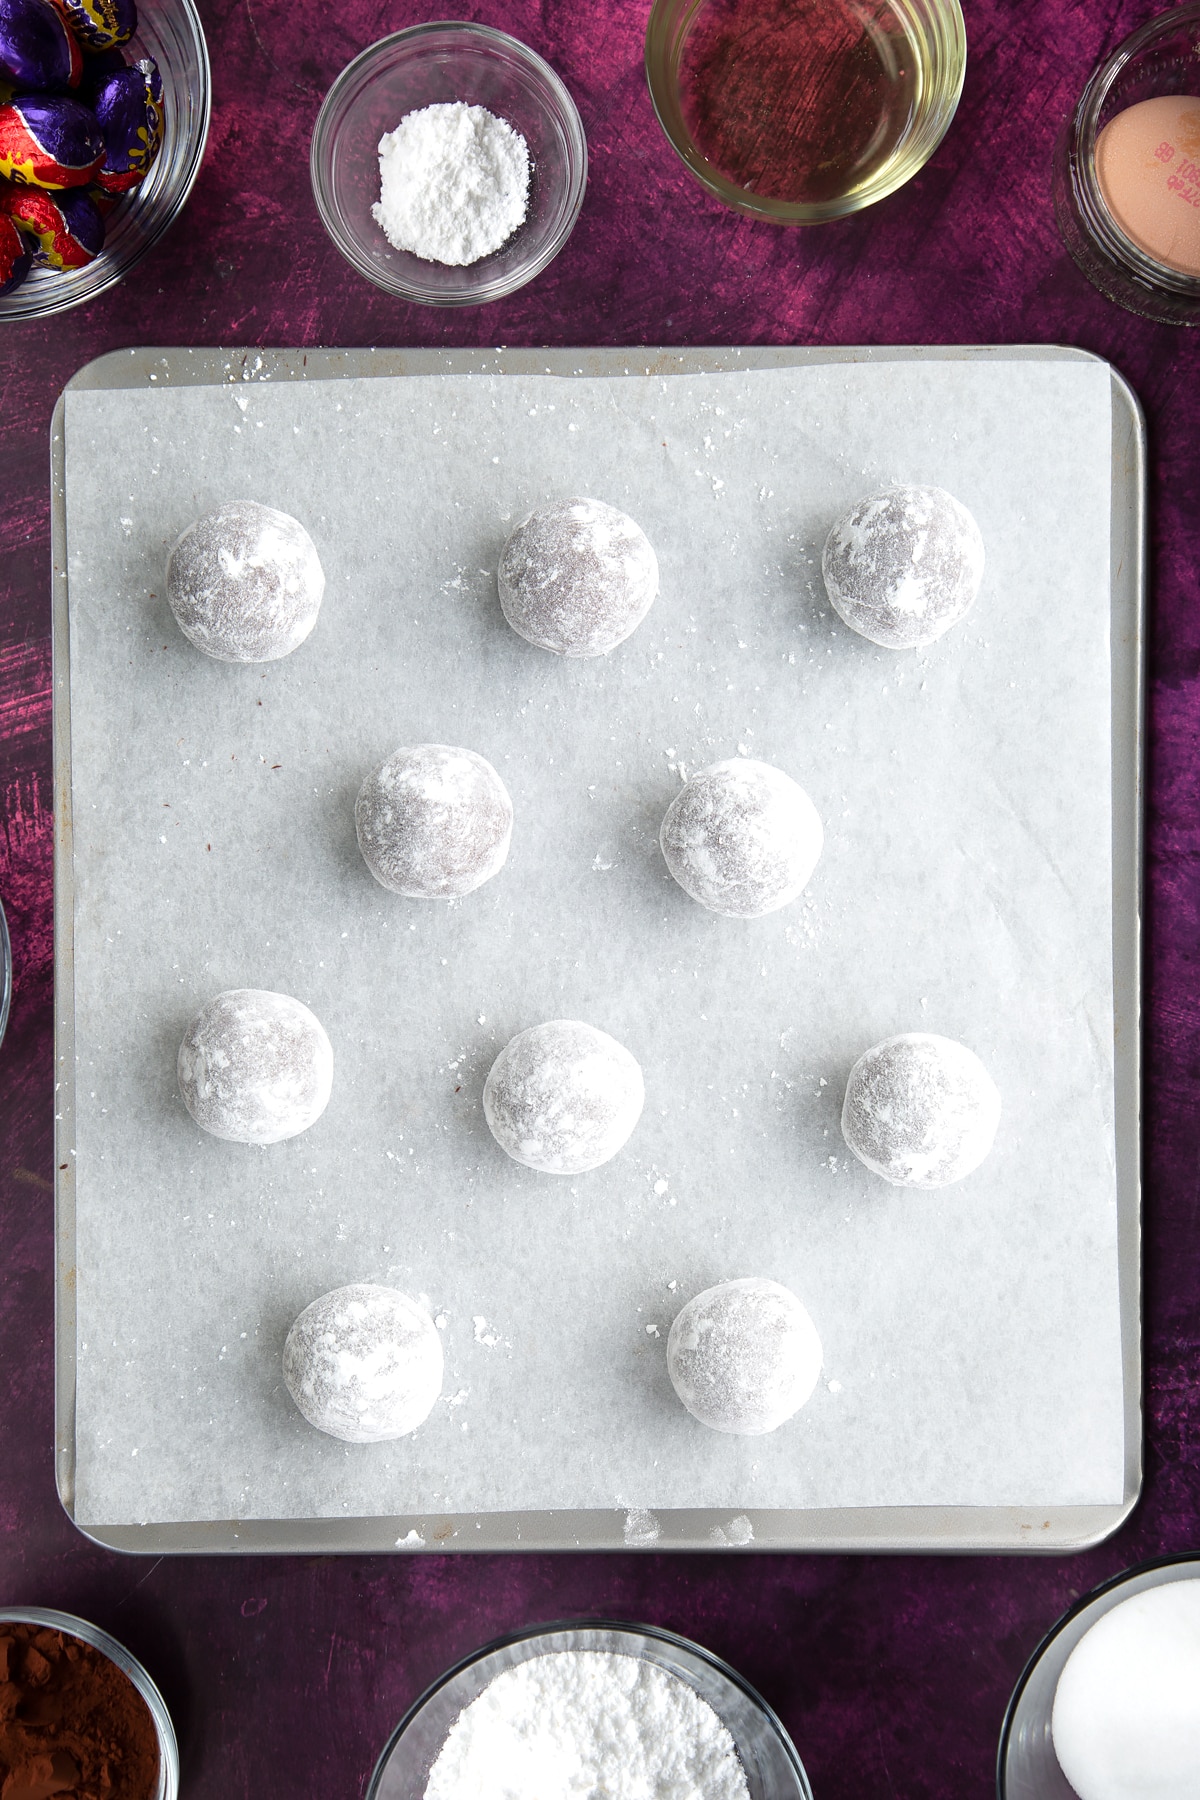 Dusting the balls with icing sugar.